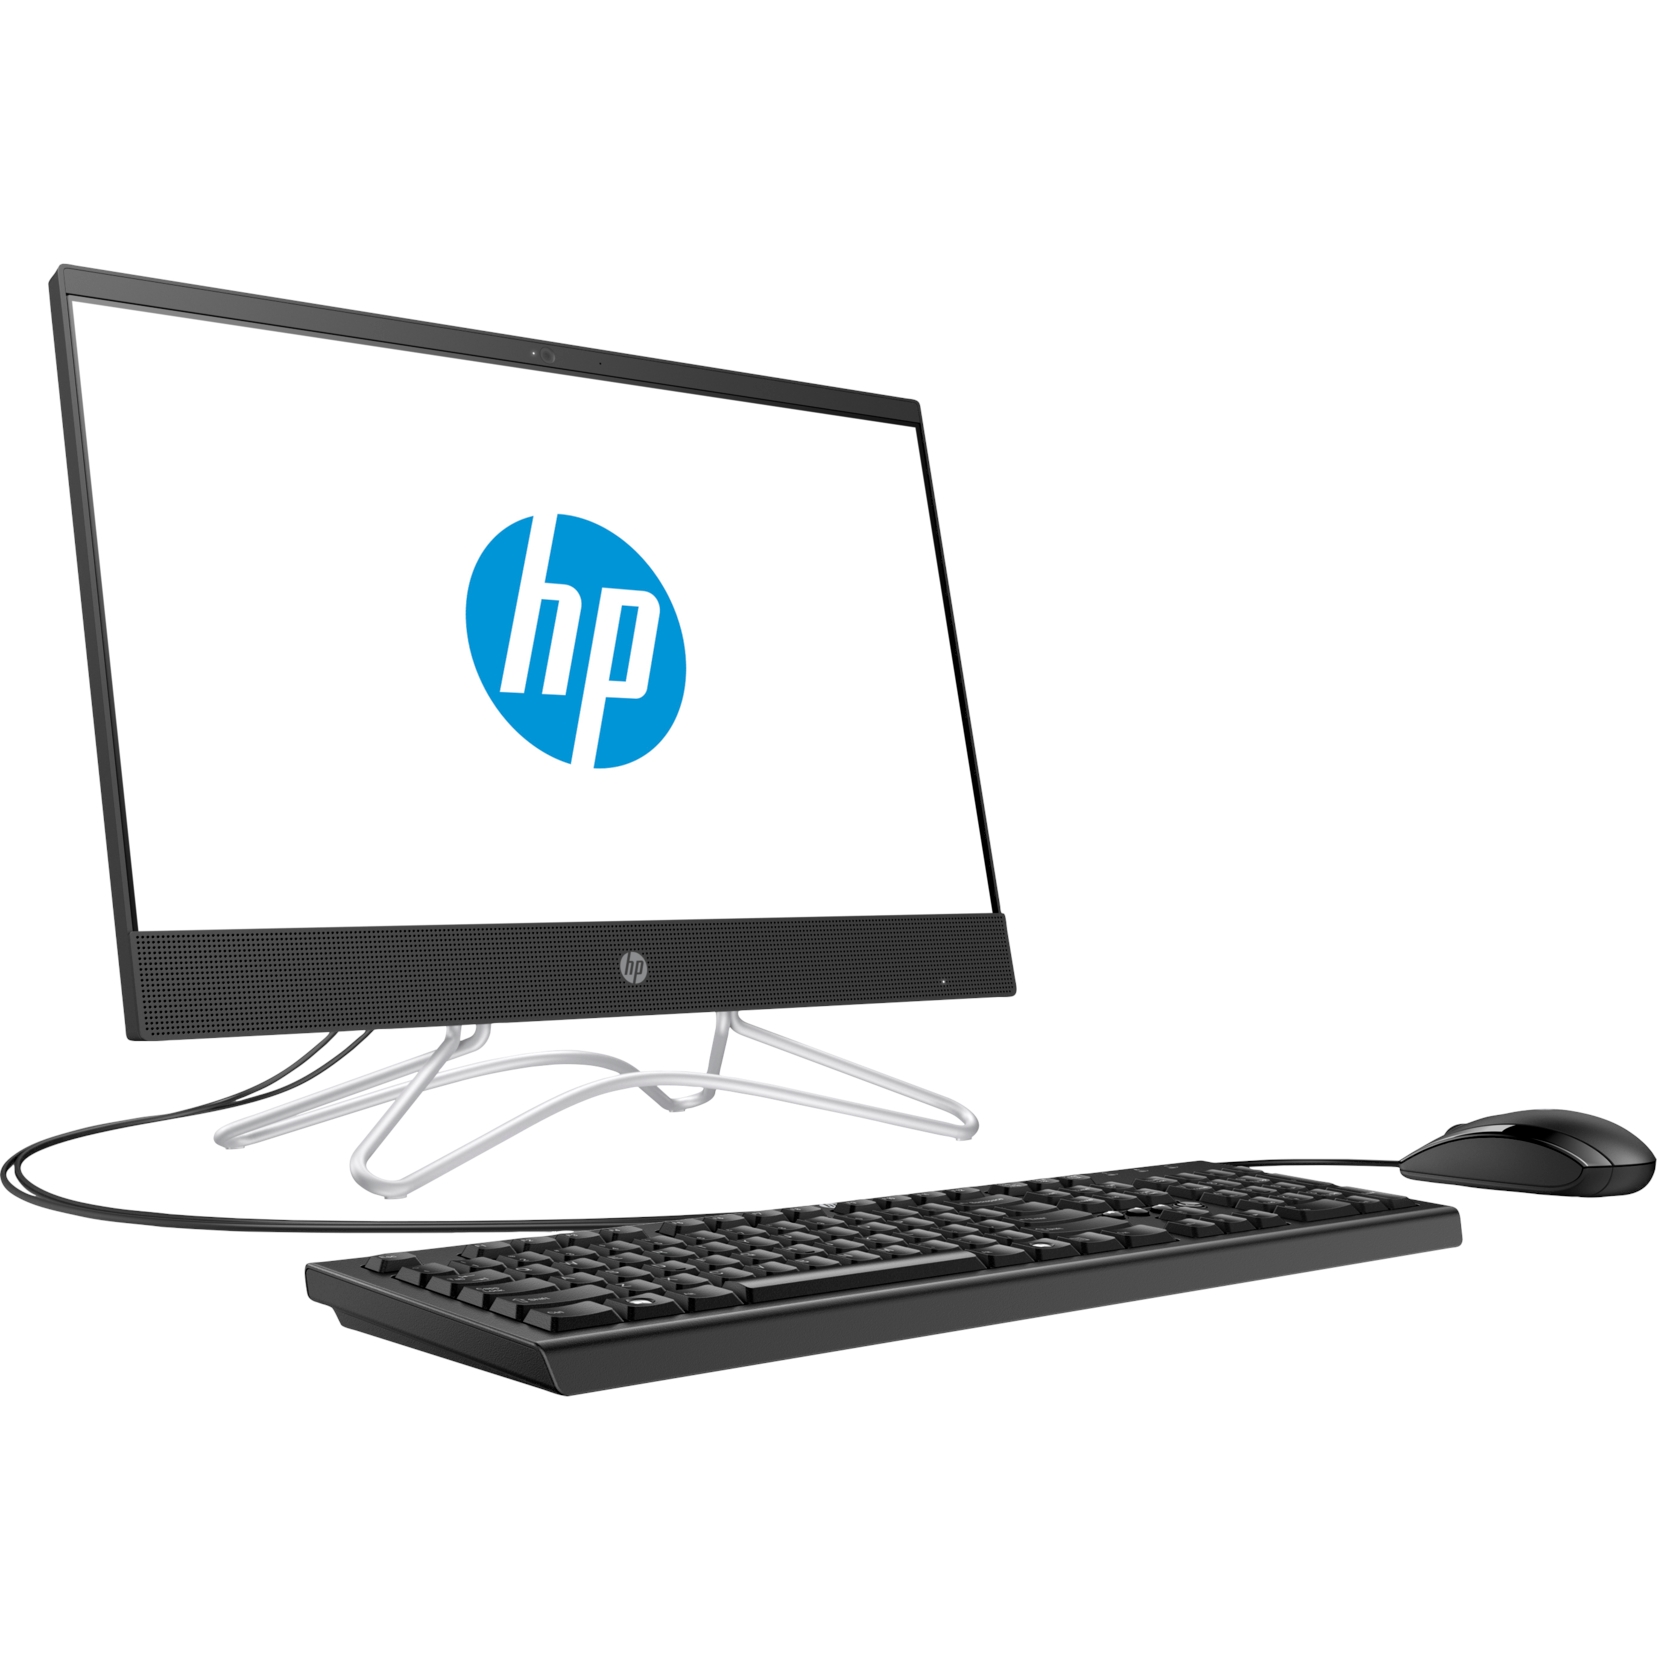 HP 22-C0082NT 9EV81EA I5-9400T 8GB 128GB SSD/2TB 2GB NVIDIA MX110 21.5" FHD FREEDOS ALL IN ONE PC